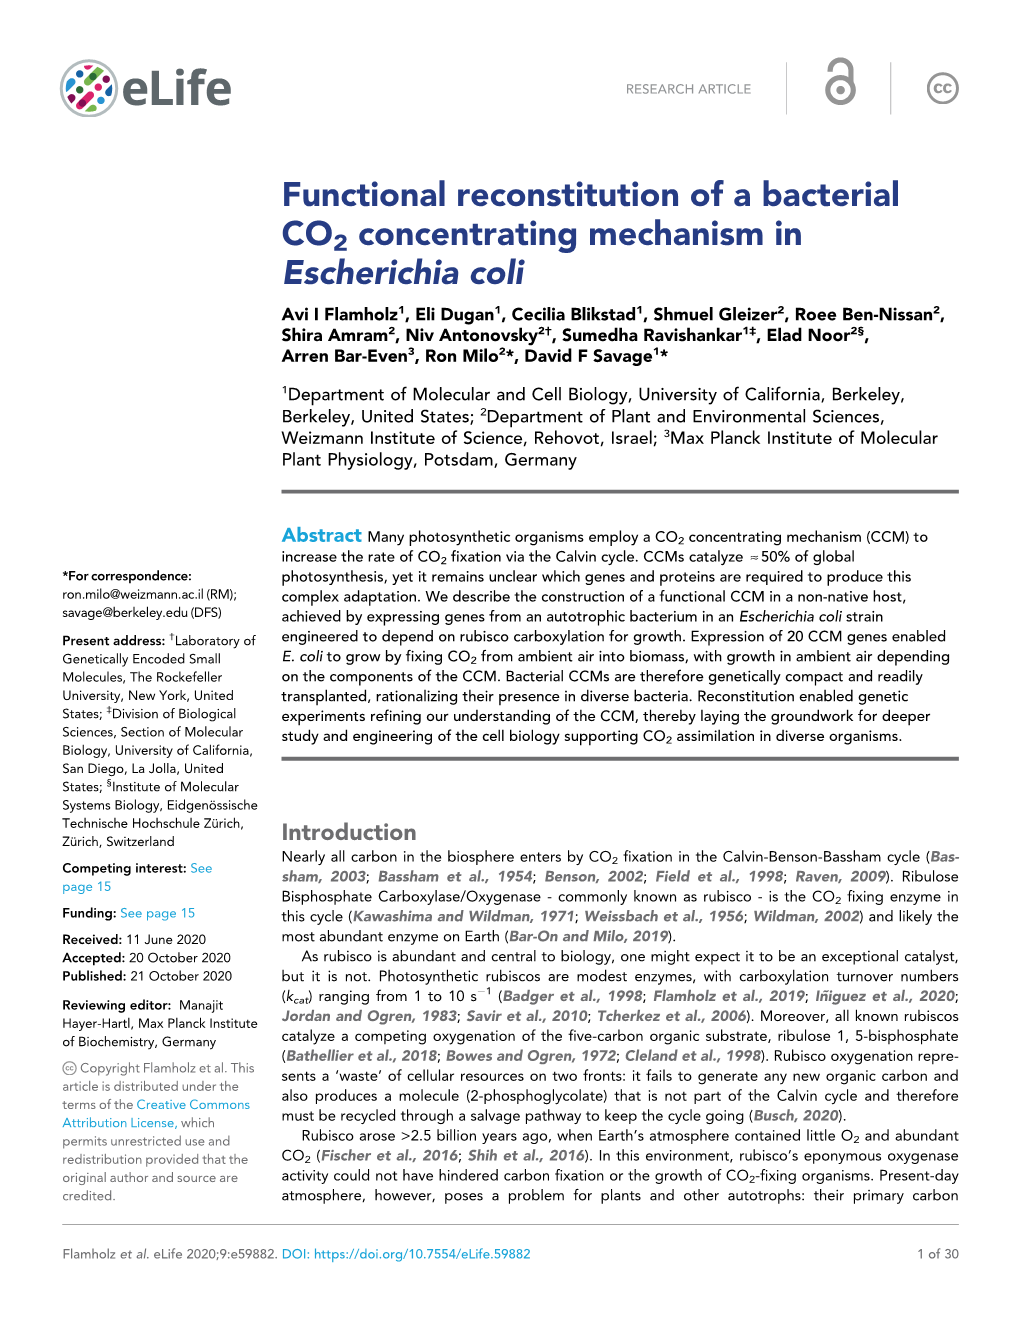 Functional Reconstitution of a Bacterial CO2 Concentrating Mechanism In